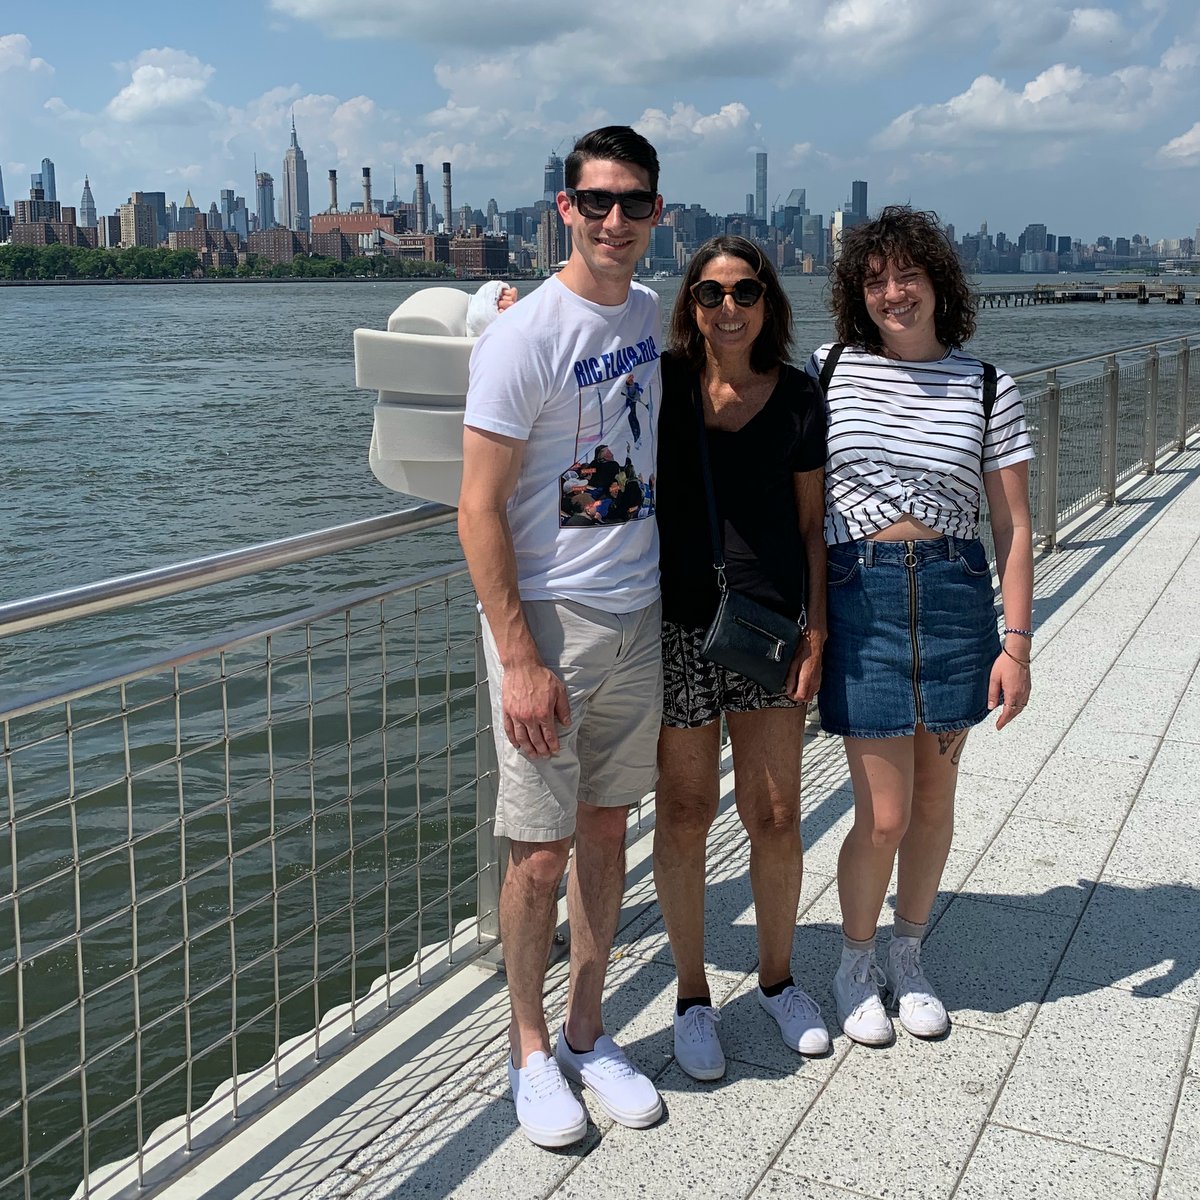 Ann on vacation with her adult children, a city skyline in the background